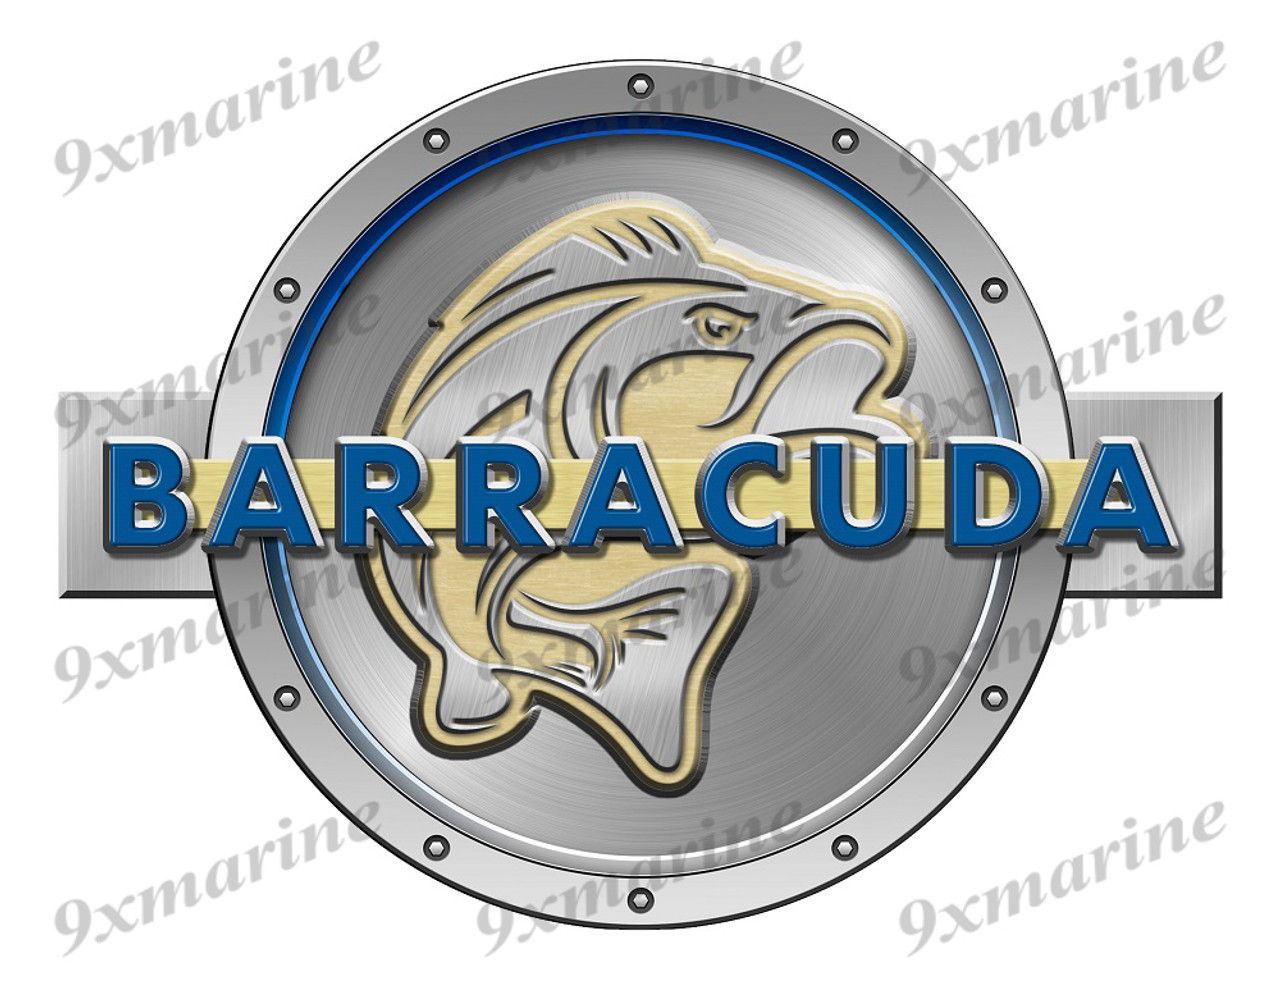 One Barracuda Remastered Sticker. Brushed Metal Style - 7.5" diameter